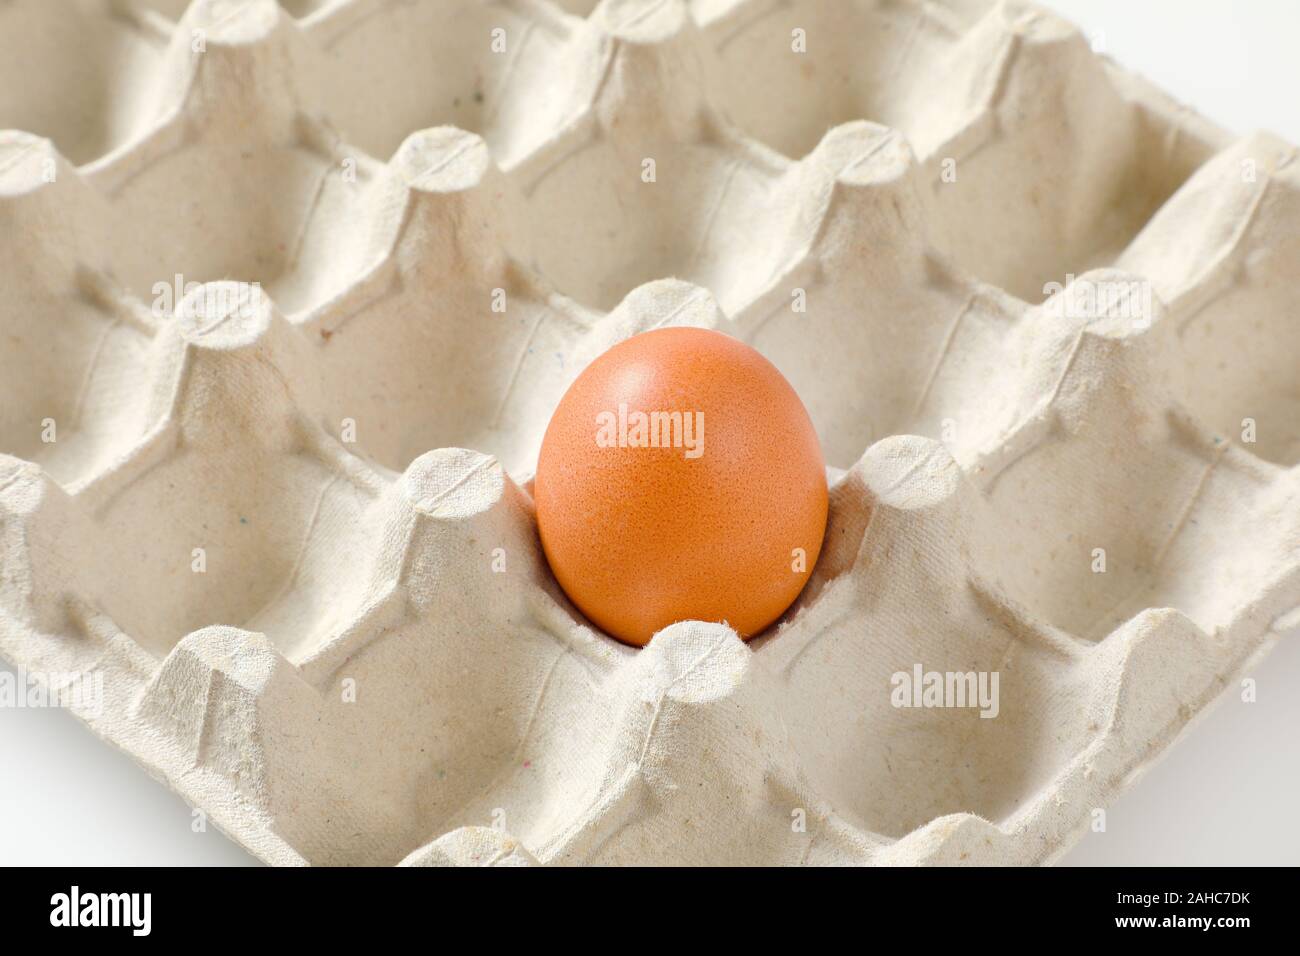 One brown egg left in a twenty dimpled egg tray Stock Photo